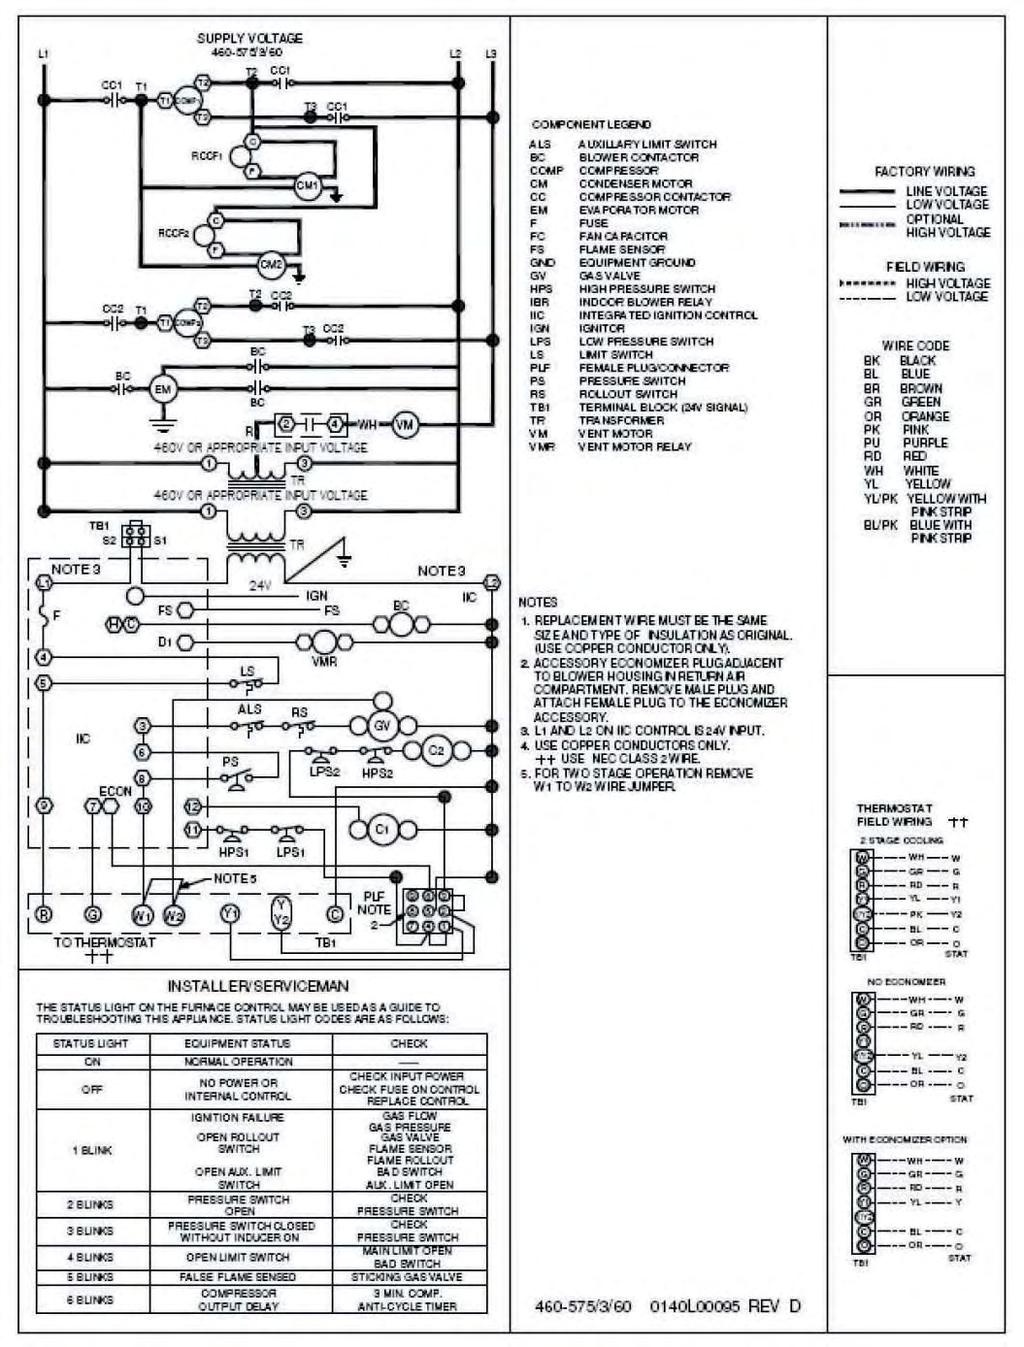 WIRING DIAGRAM CPG120*4B/7B** (460V / 575V BELT DRIVE) CONT. PRODUCT SPECIFICATIONS Wiring is subject to change.